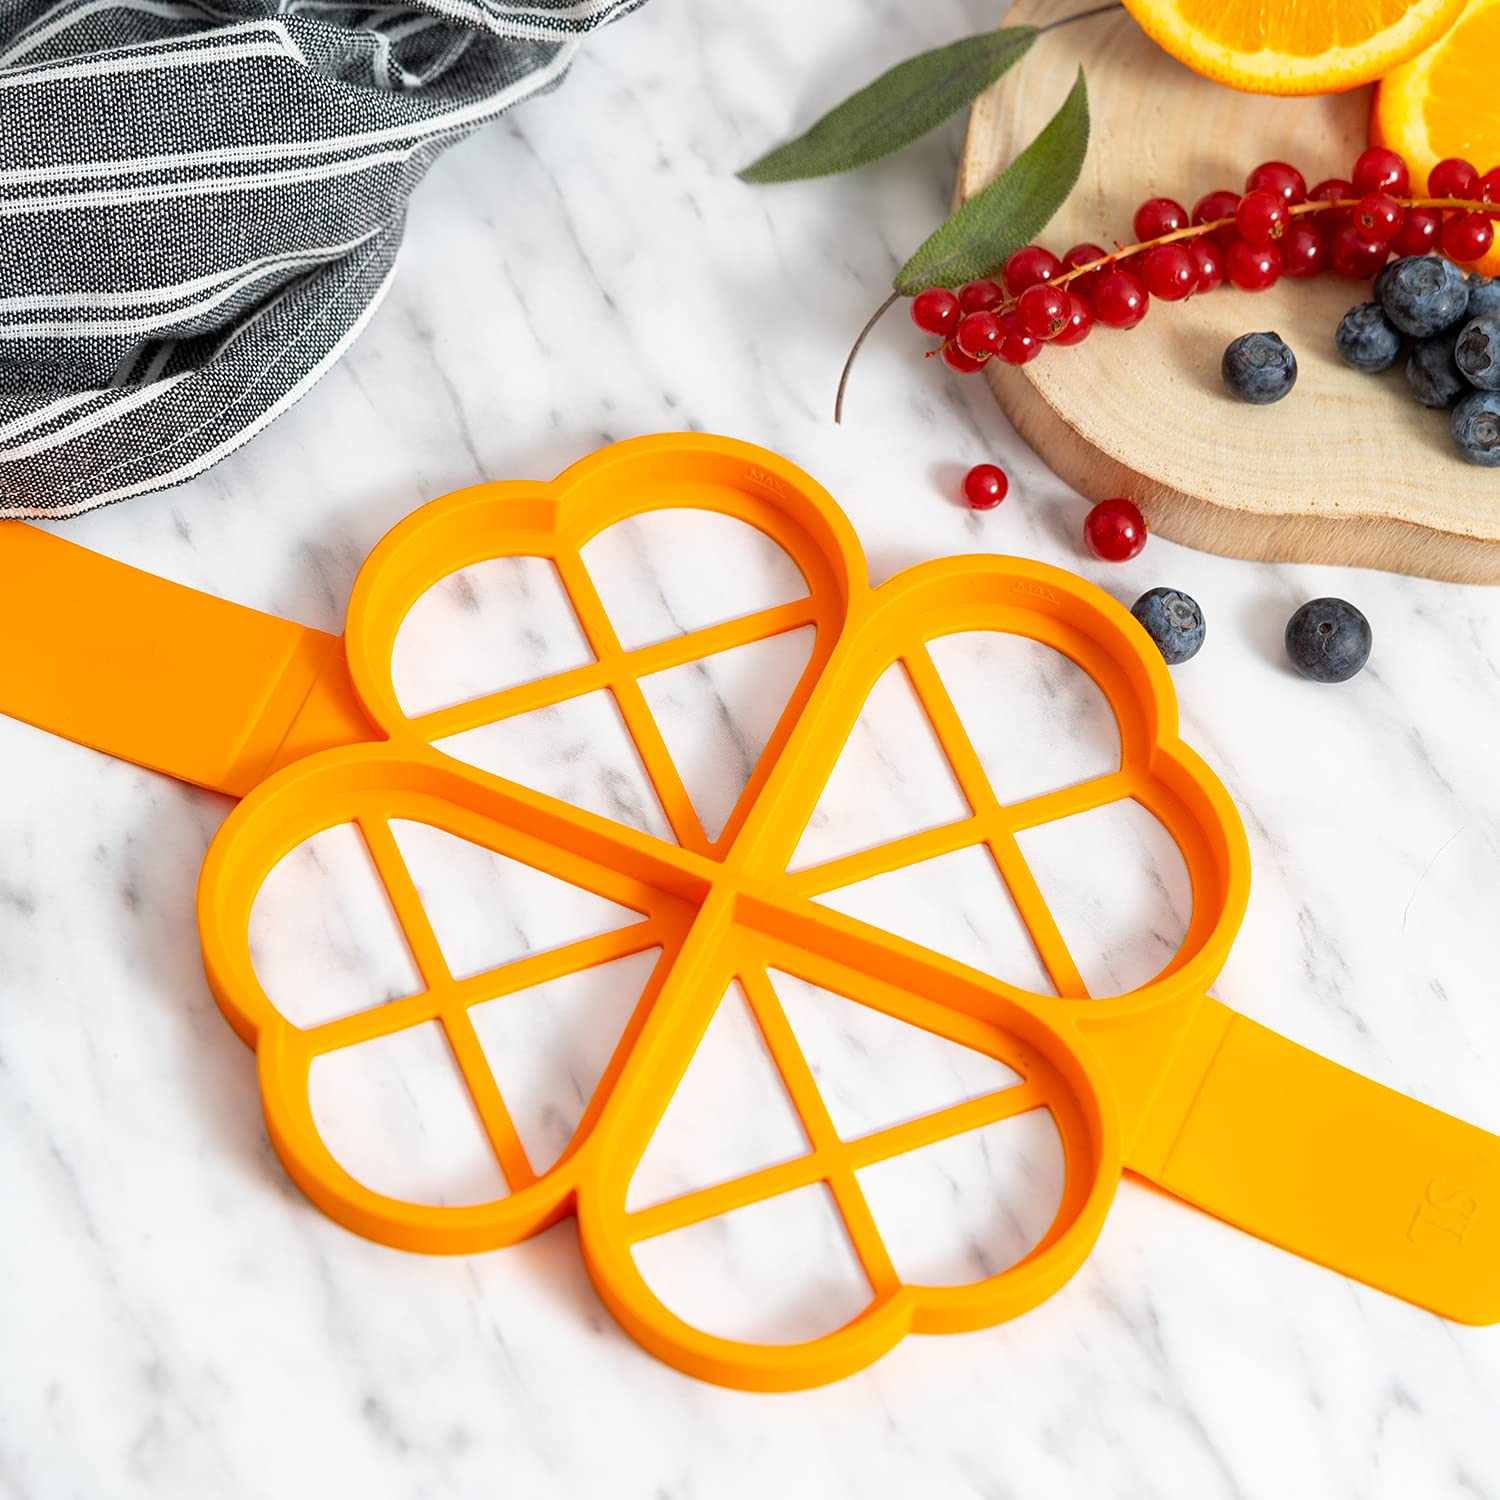 Silicone Pancake Mold Flipper – 4 Heart Shaped Egg Rings Set - Great for Cooking Fried Eggs, Hash Browns, Crumpets, Omelets on Griddle for Your Kids and Loved Ones, Orange